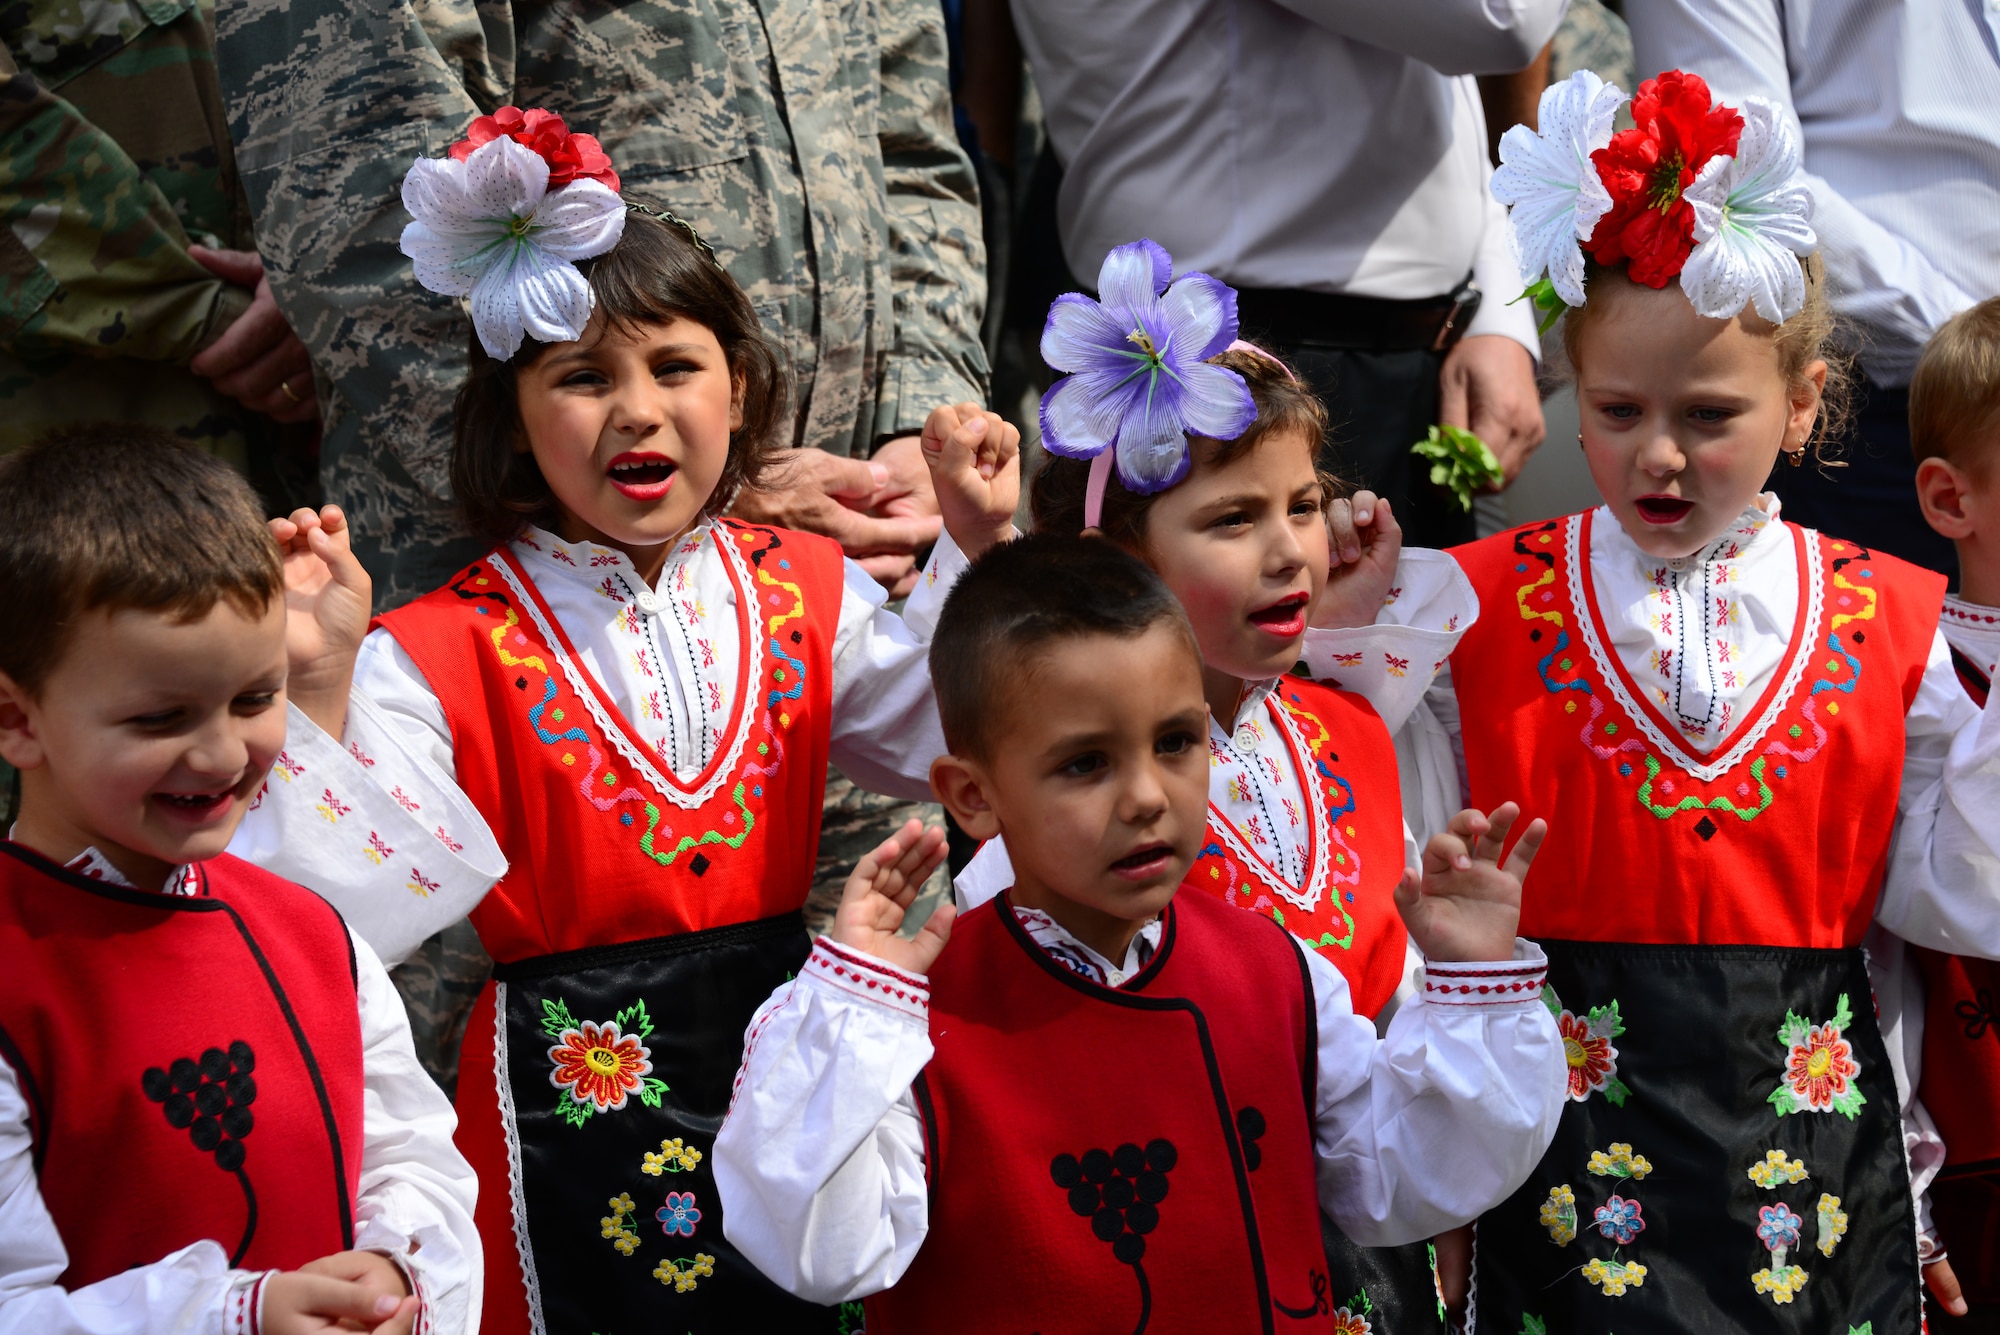 Students sing traditional songs at the grand re-opening of the Izvorche Kindergarten school in Kabile, Bulgaria, Aug. 24, 2016.  Tennessee National Guard Soldiers and Airmen from the 164th Civil Engineer Squadron, 118th Mission Support Group, 134th Air Refueling Wing, and the 194th Engineer Brigade deployed to nearby Novo Selo Training Area for thier annual training to participate in Humanitarian Civic Assistance projects such as the renovation of the school.  The projects build skills for the Airmen while helping to strengthen ties with Tennessee and Bulgaria through the State Partnership Program.  (U.S. Air National Guard photo by Master Sgt. Kendra M. Owenby, 134 ARW Public Affairs)